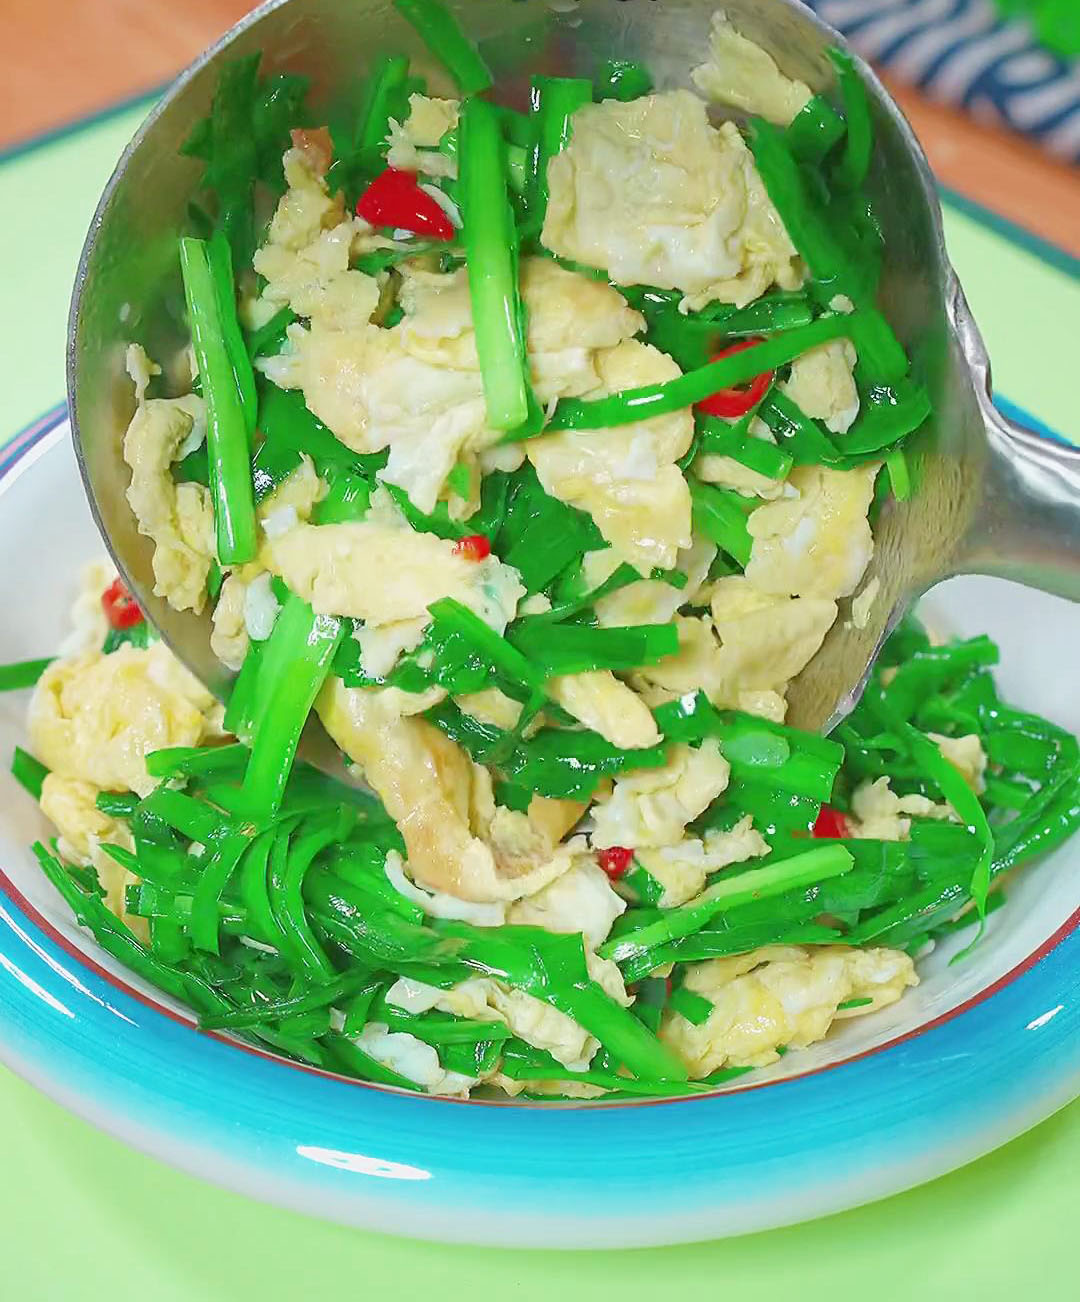 Transfer the Chinese chive and egg stir fry to a serving dish